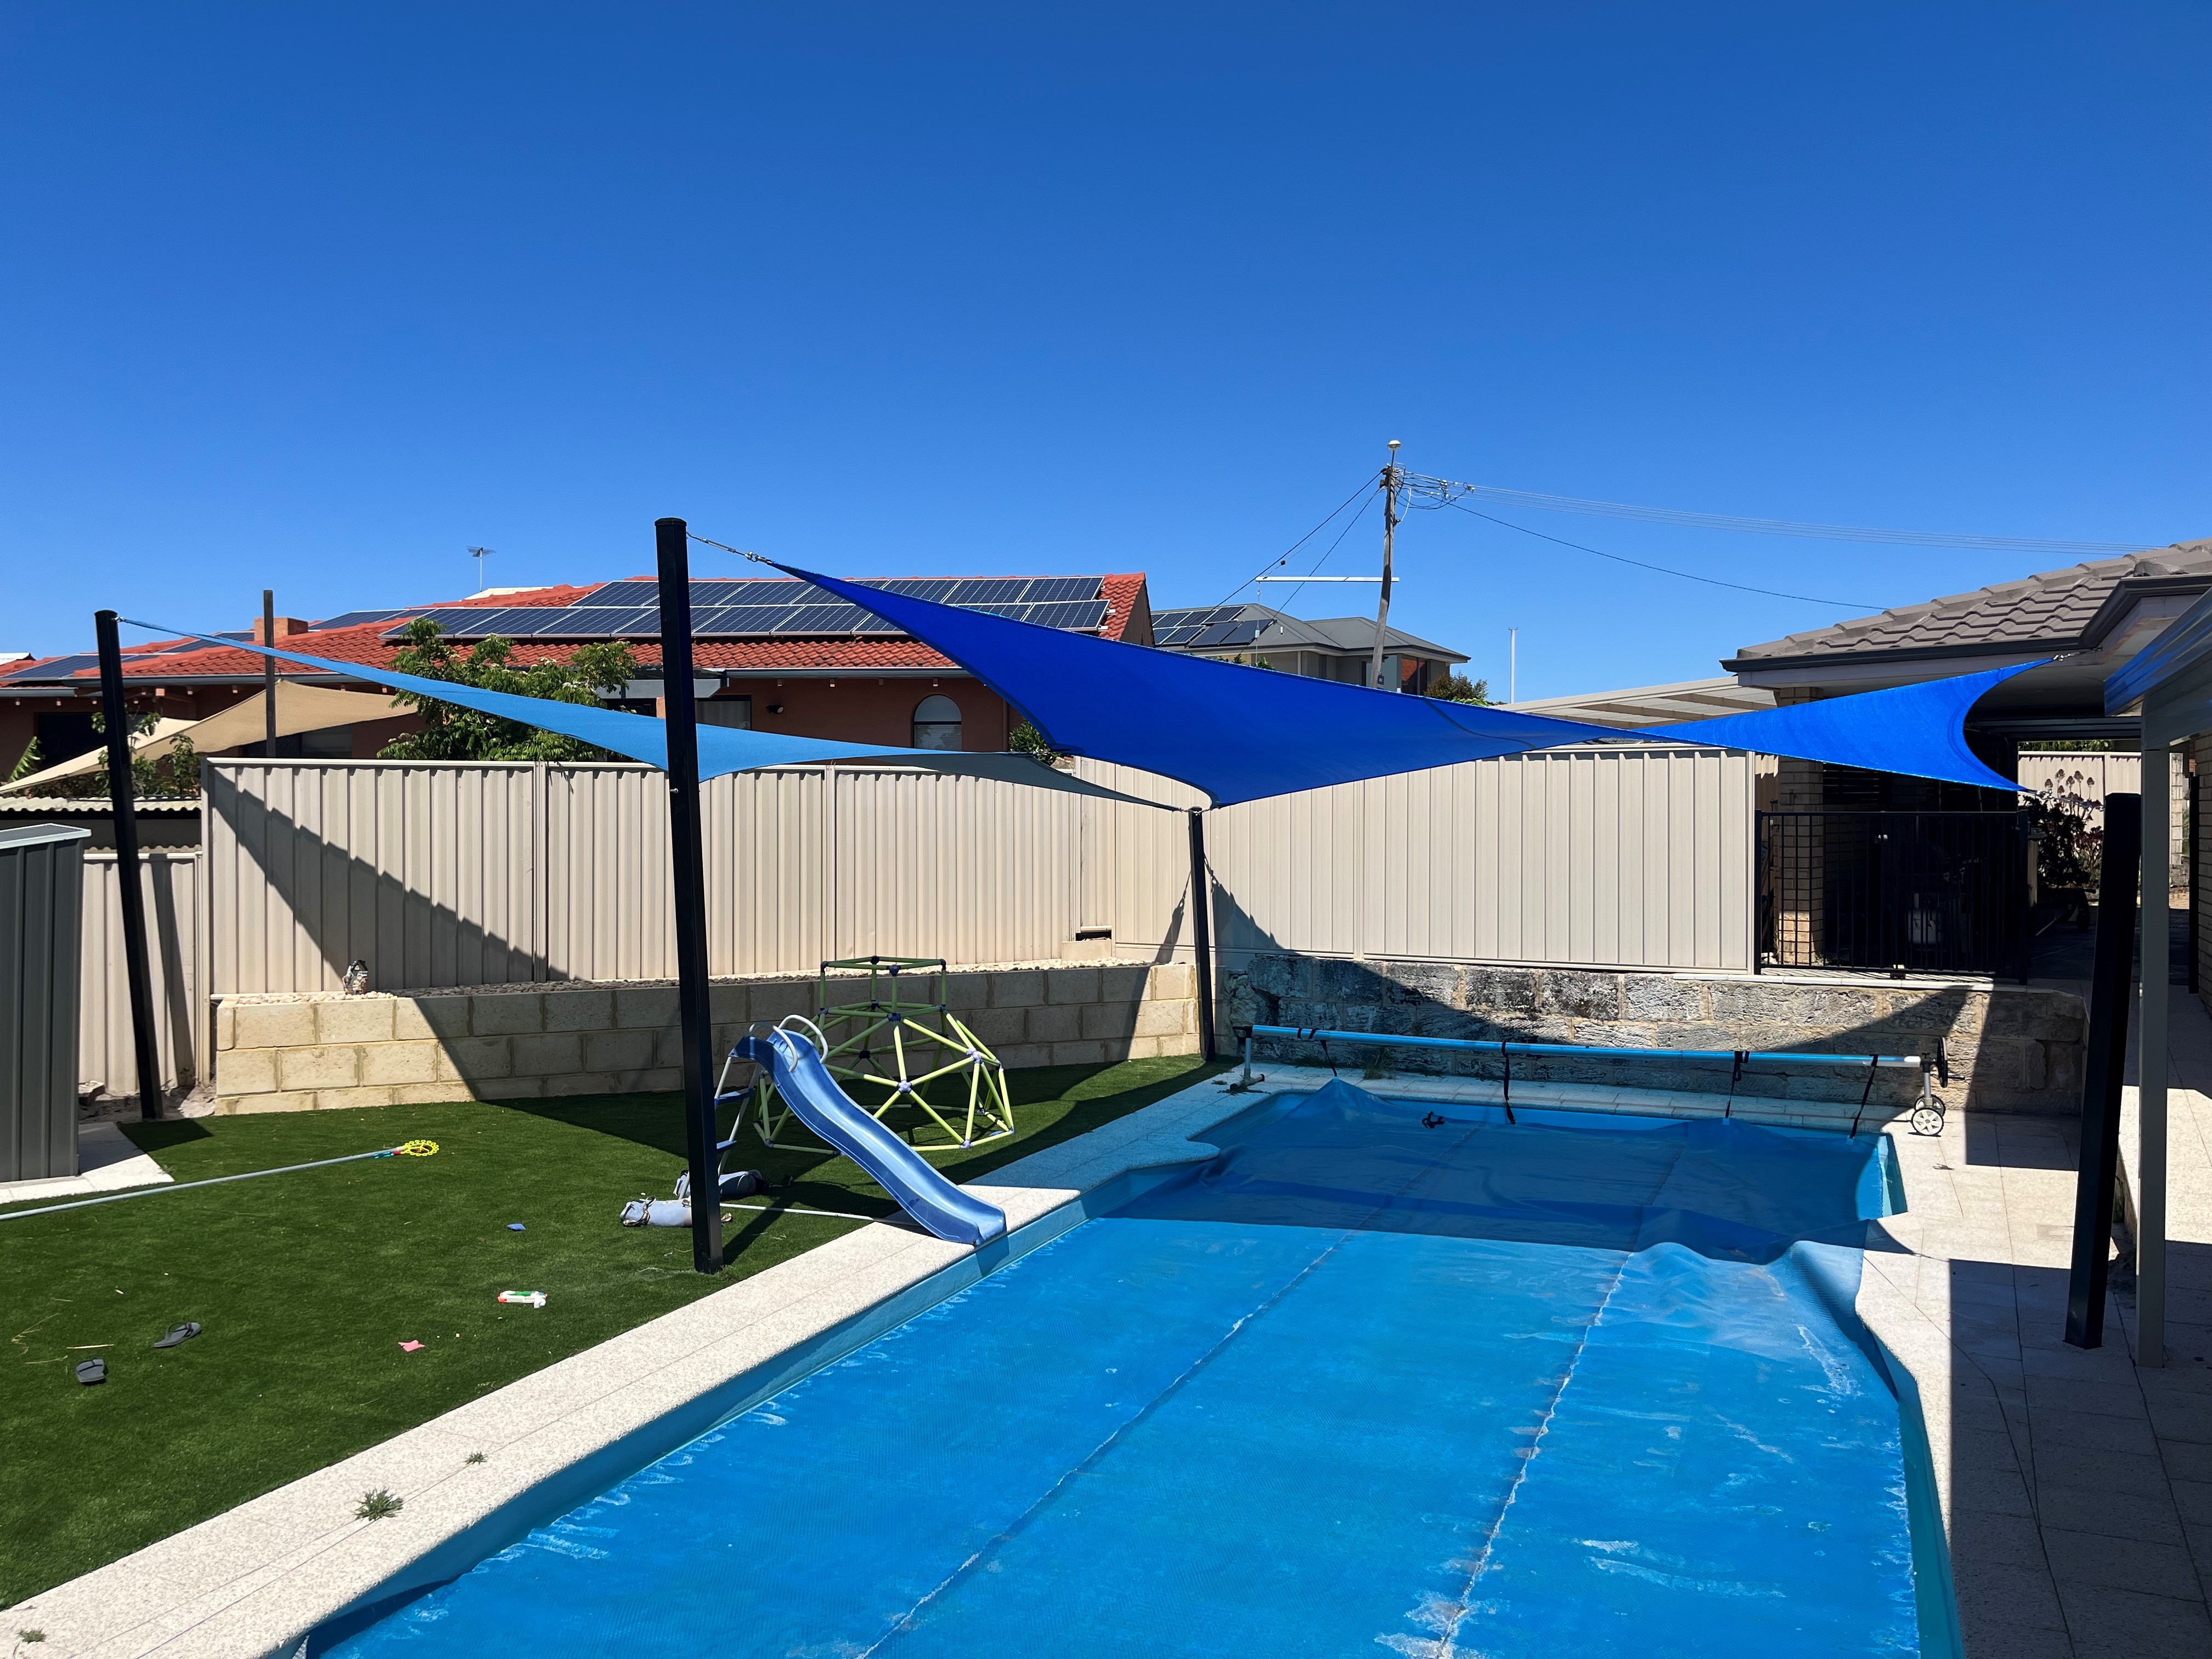 Willetton_Sail_City_Shade_Sails_Z16_Navy_Blue_and_Laguna_Blue_pool_and_play_area_shade.jpg